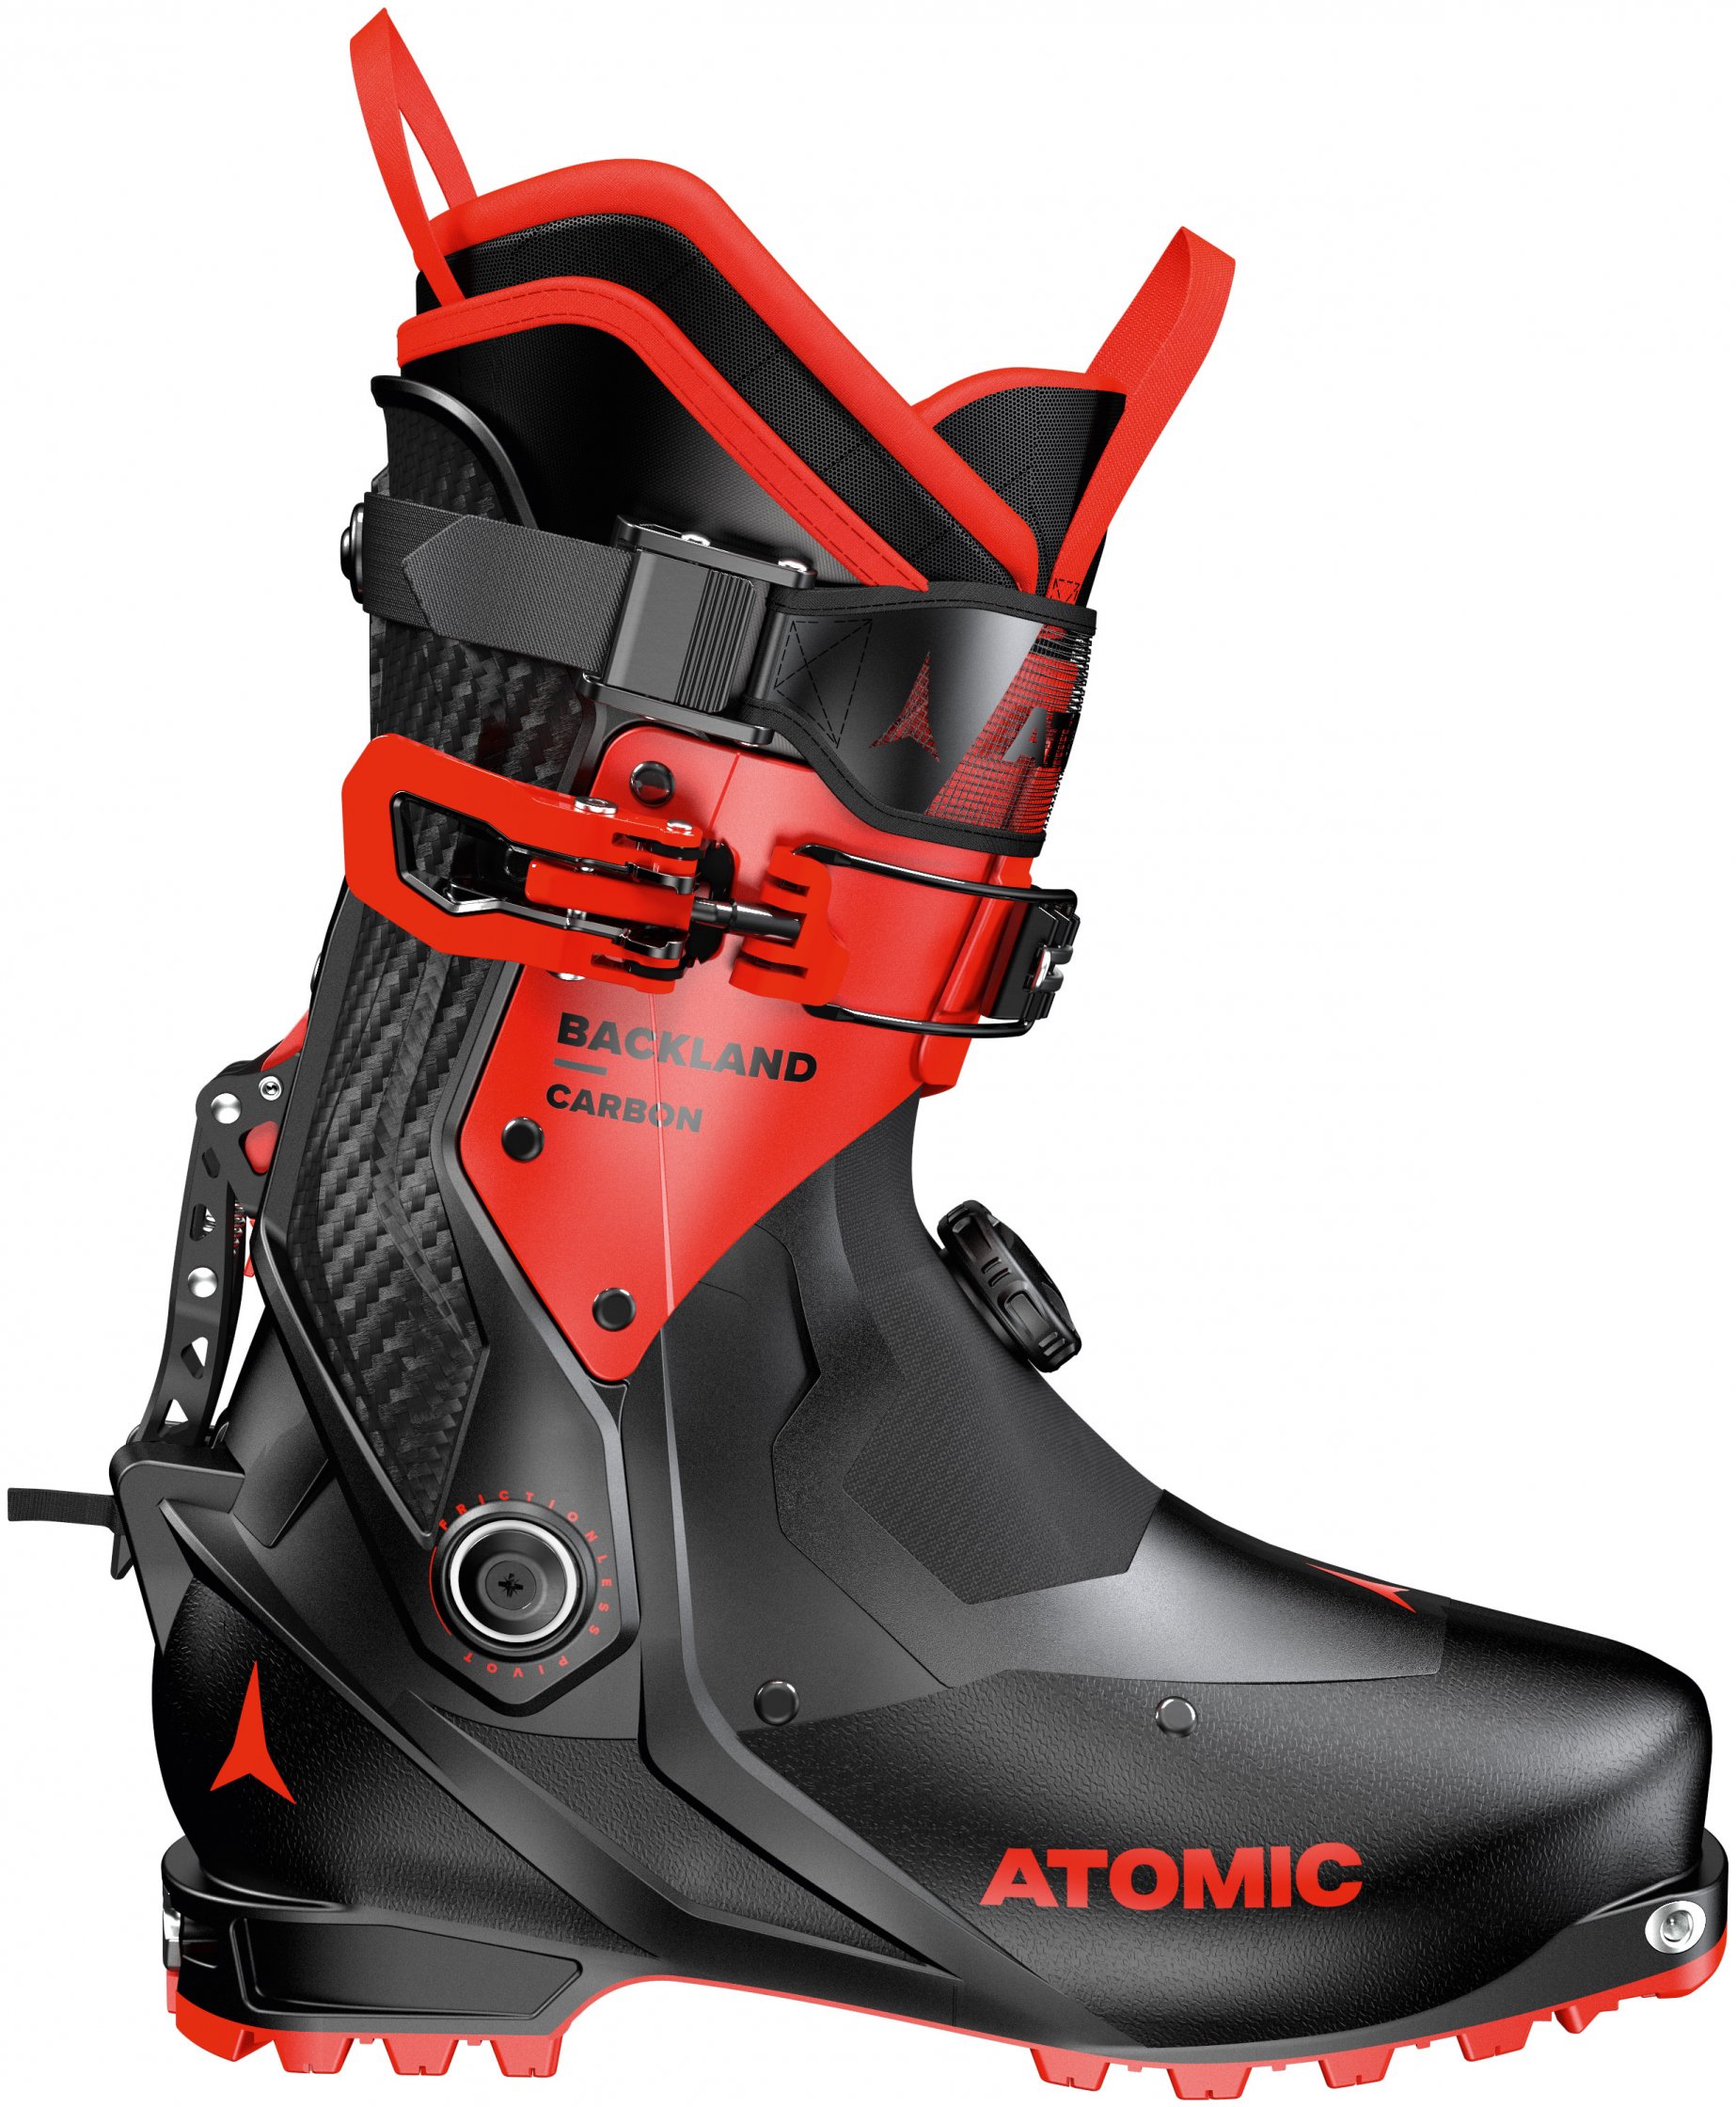 Atomic Backland Carbon Boot - 2021/22